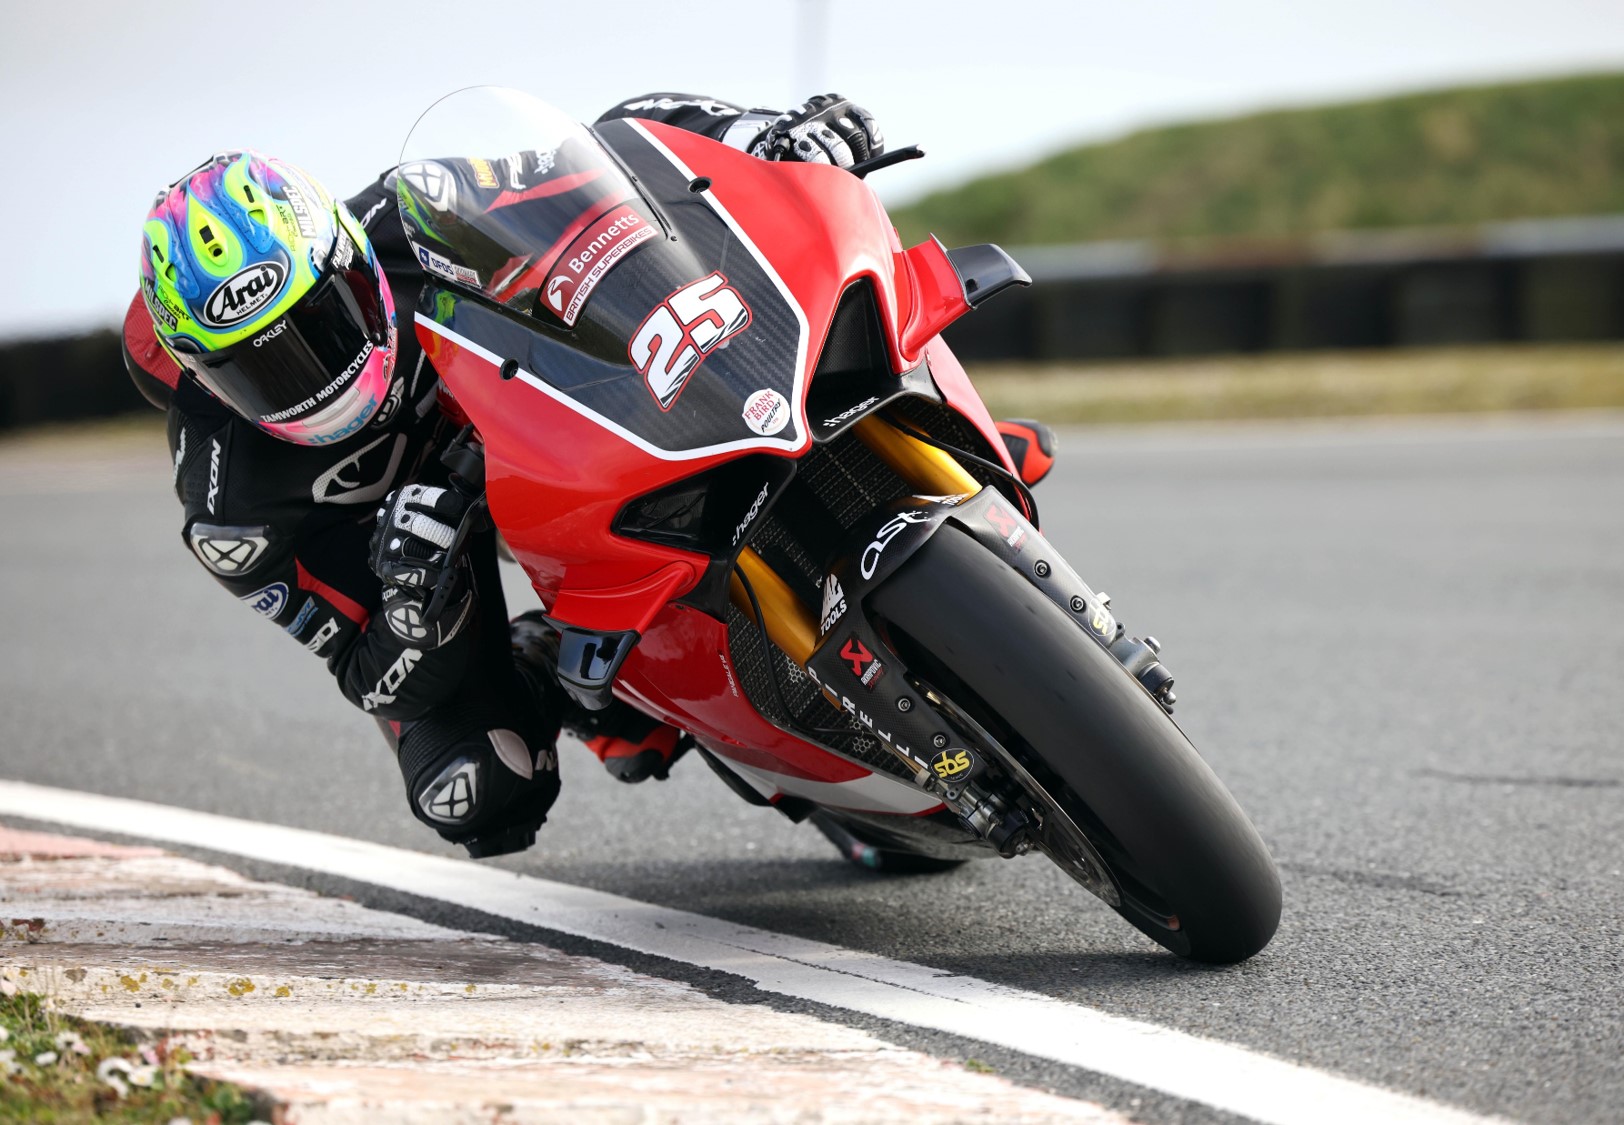 North West 200 Latest: Brookes Drafted In To Race PBM Ducati